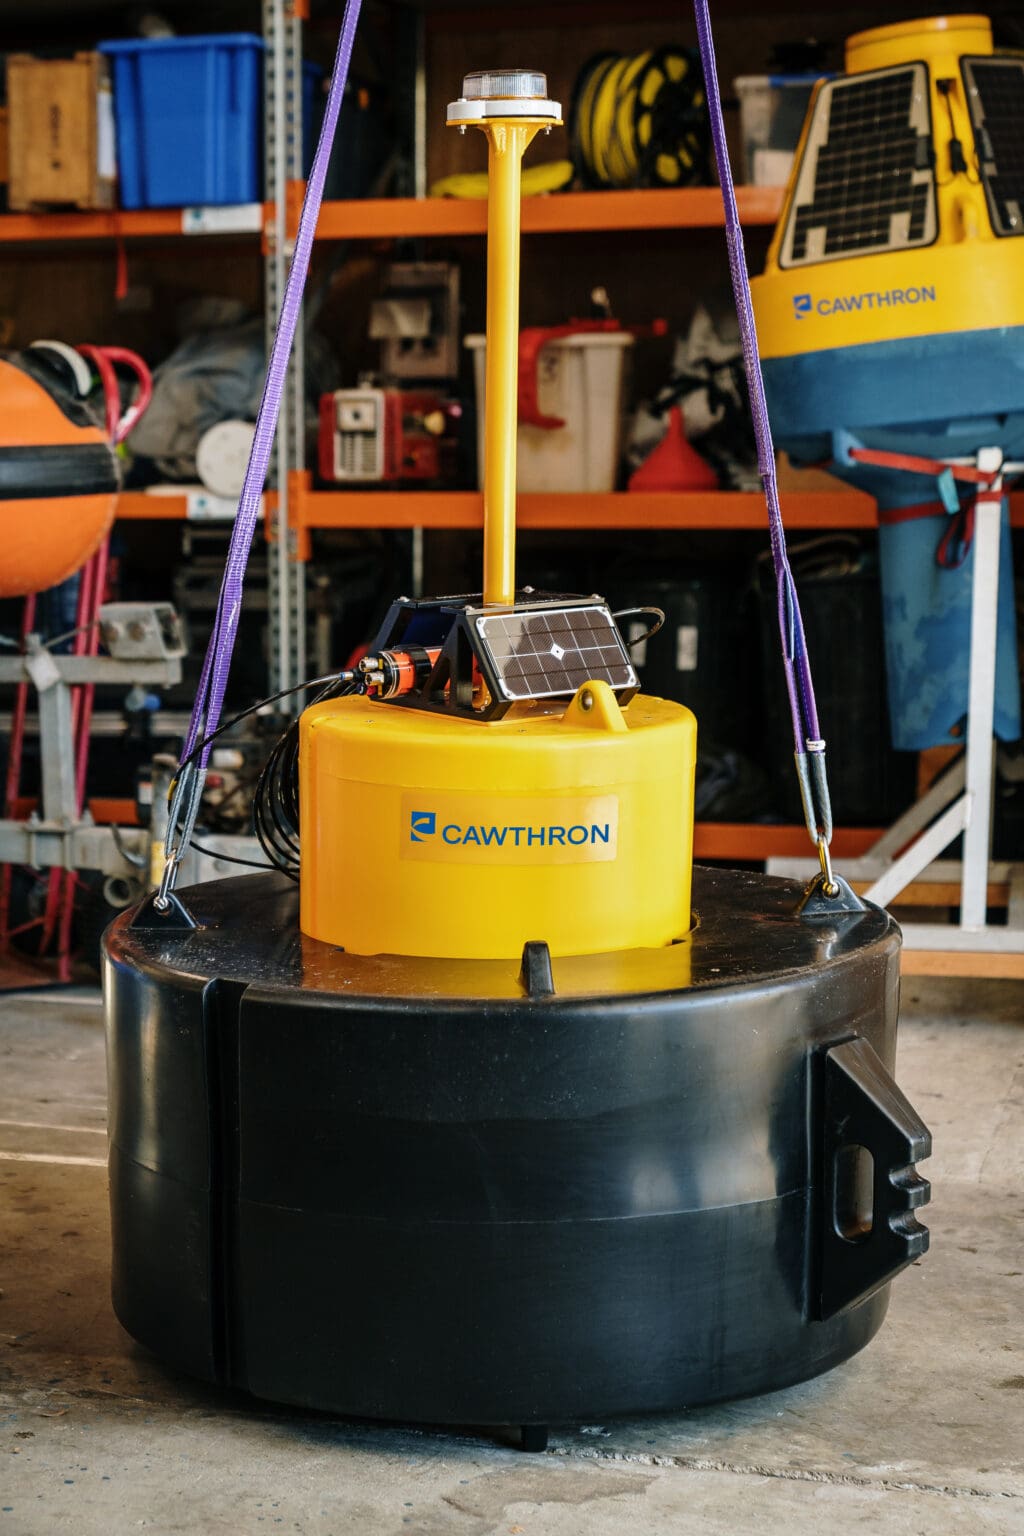 Remote sensing buoy in the Cawthron Boatshed